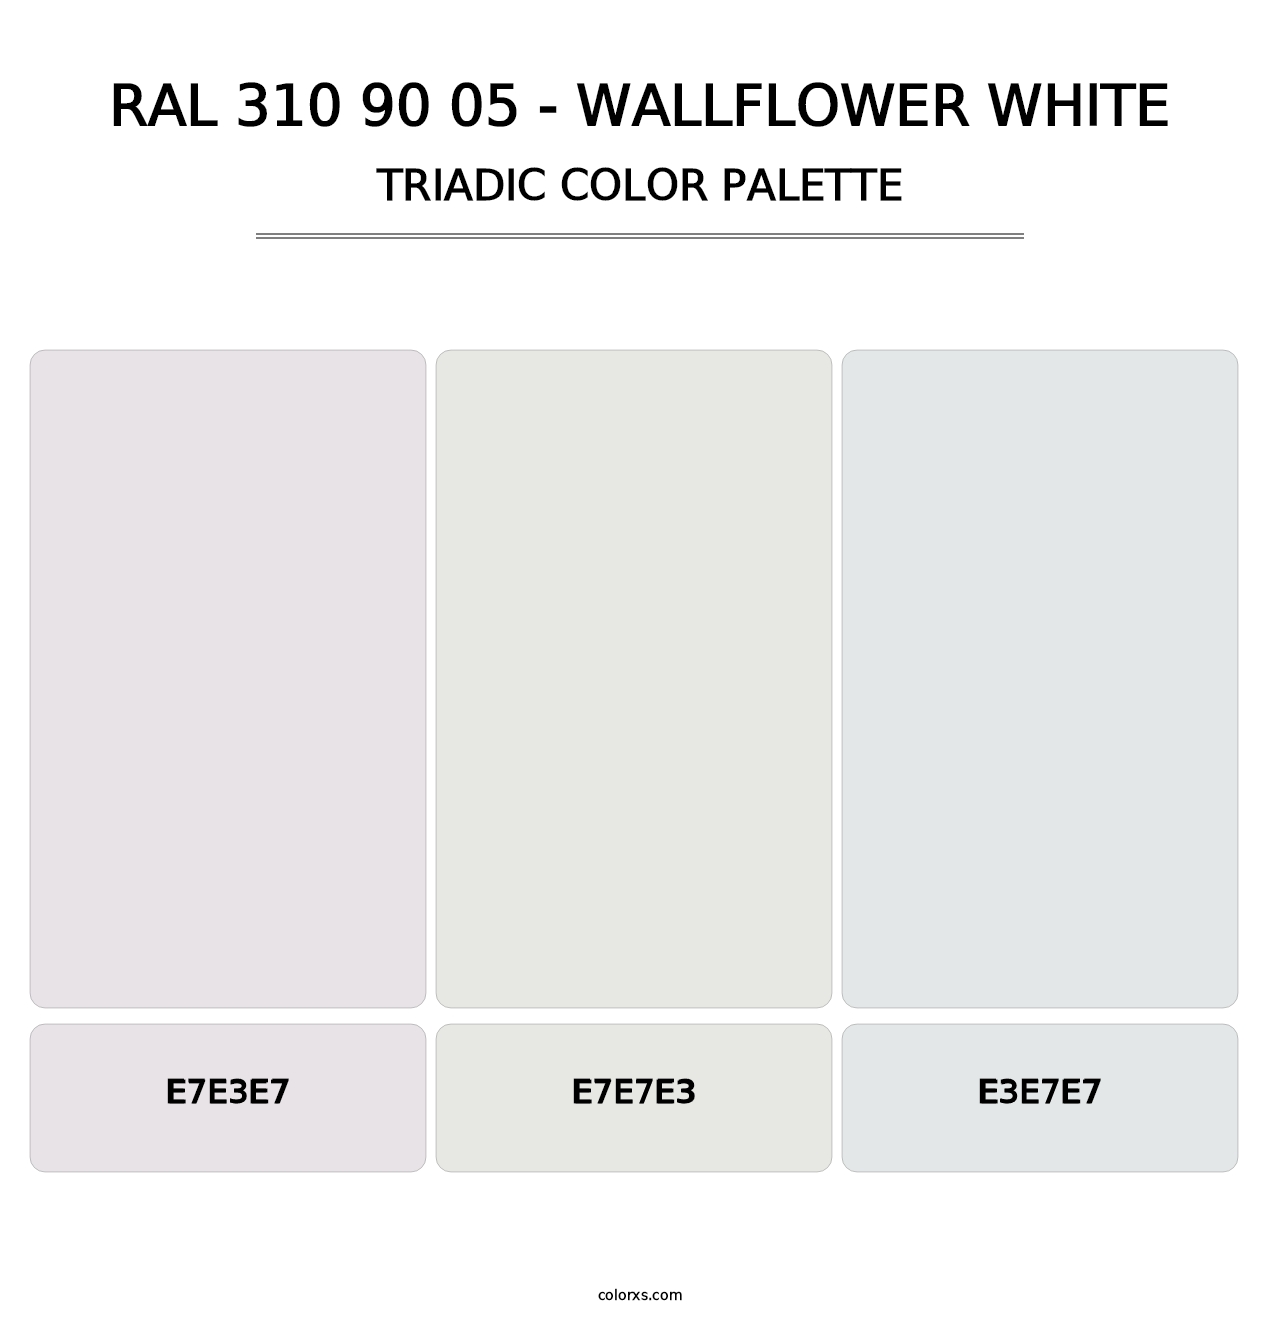 RAL 310 90 05 - Wallflower White - Triadic Color Palette